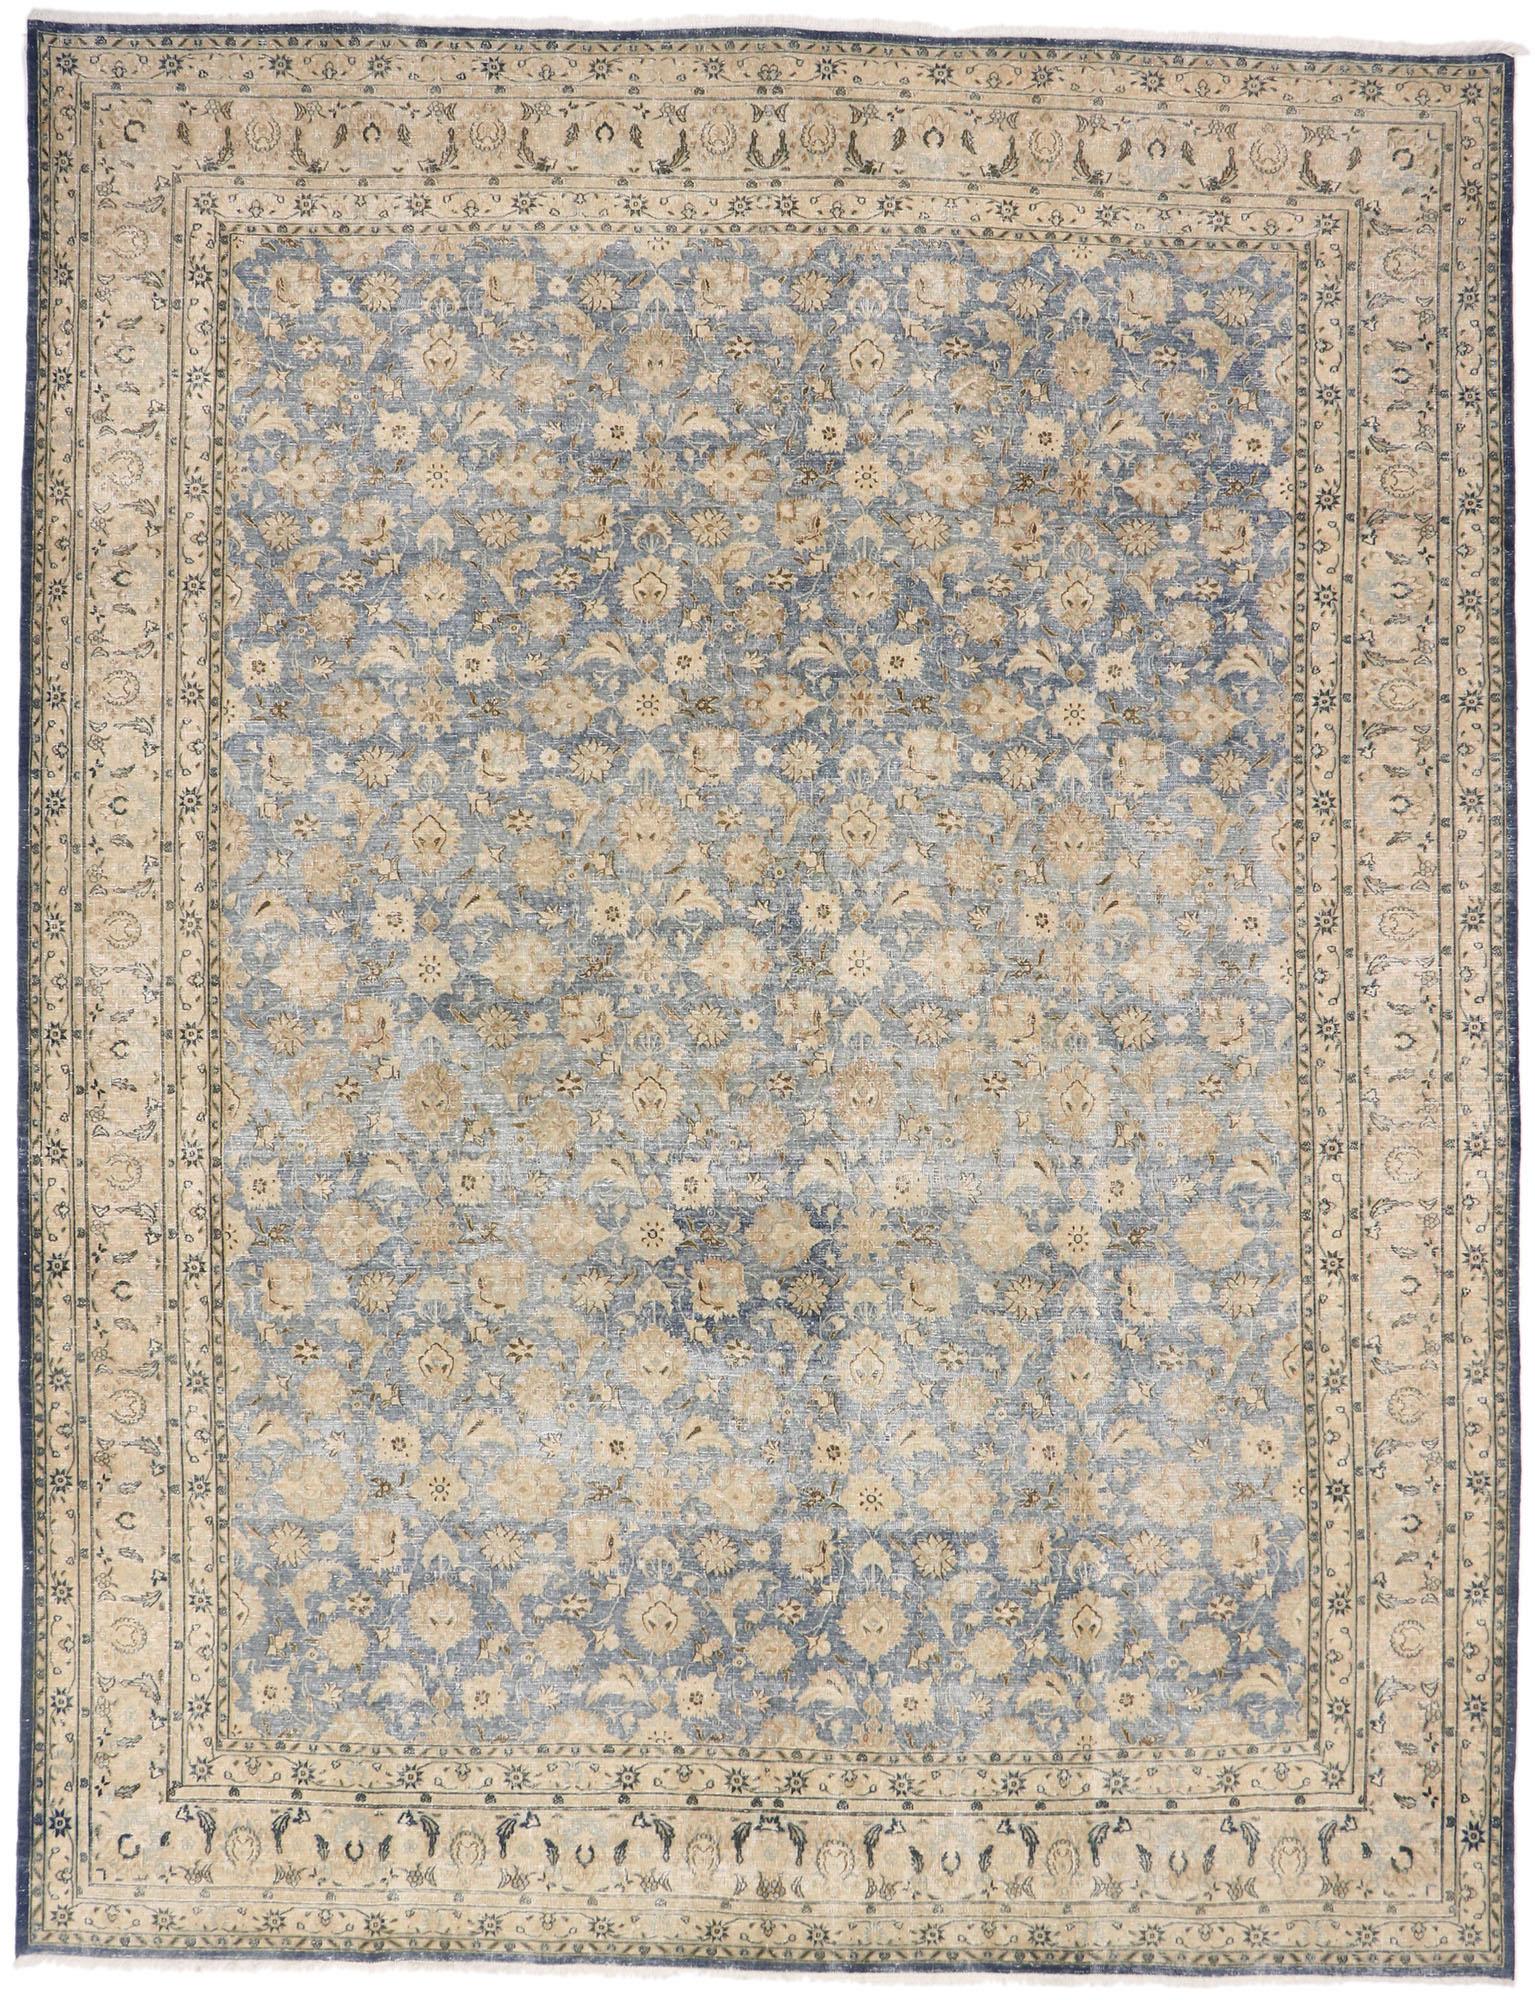 Distressed Vintage Persian Rug with Rustic Coastal Style 2